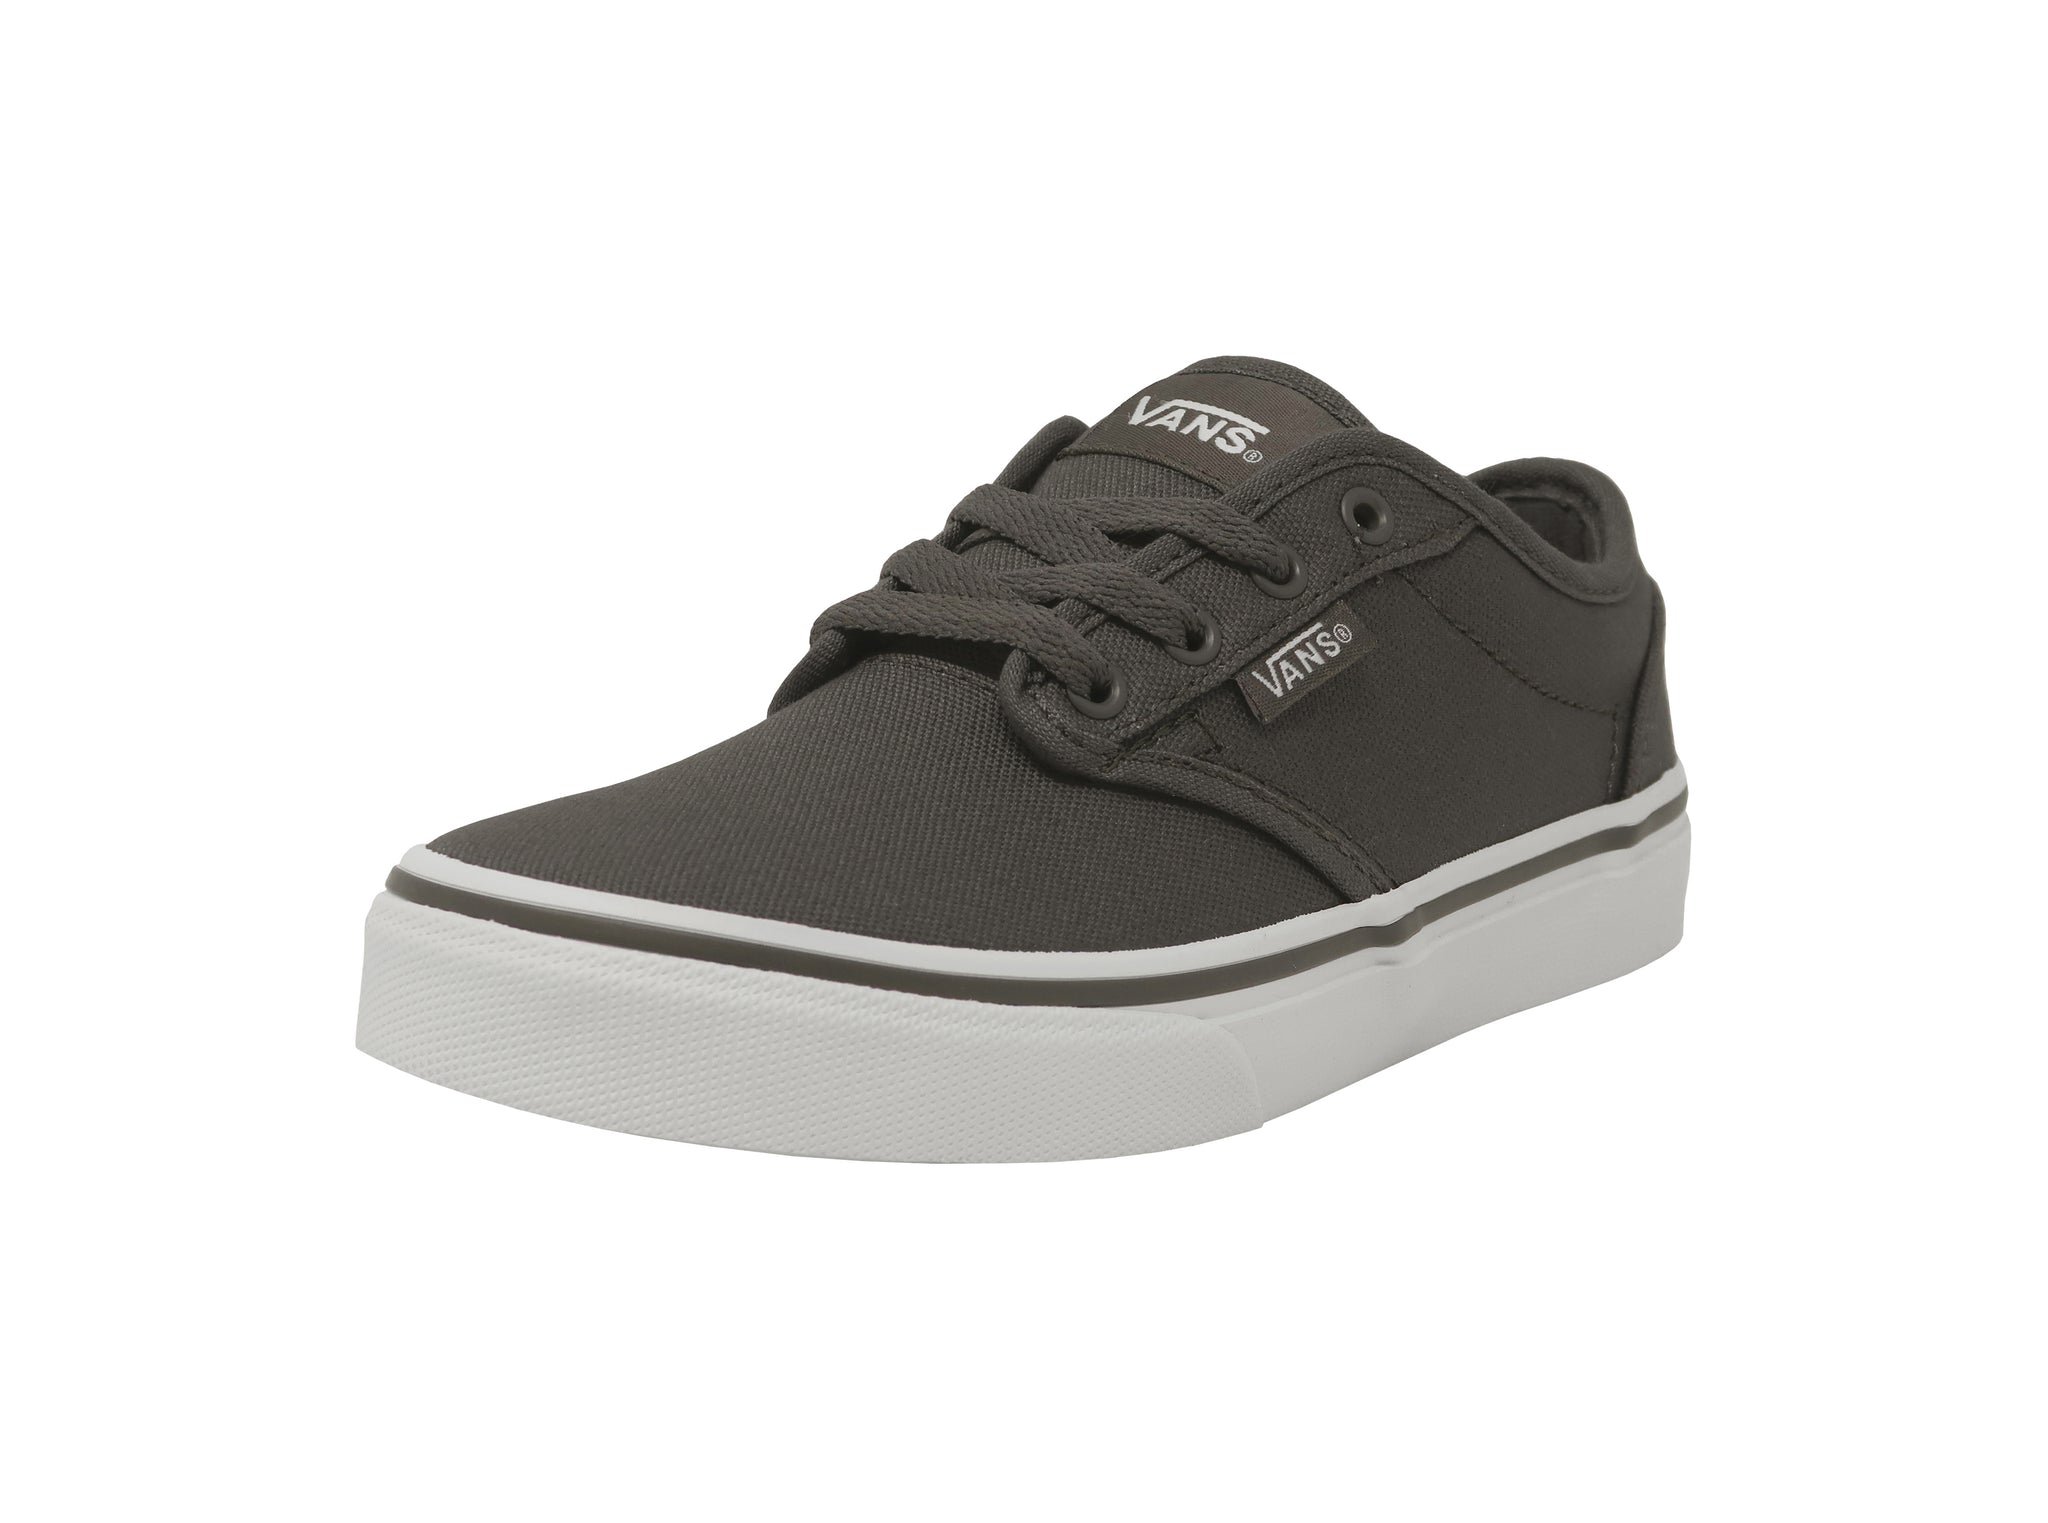 Vans Kid's Shoes Atwood Pewter Gray Fashion Sneakers